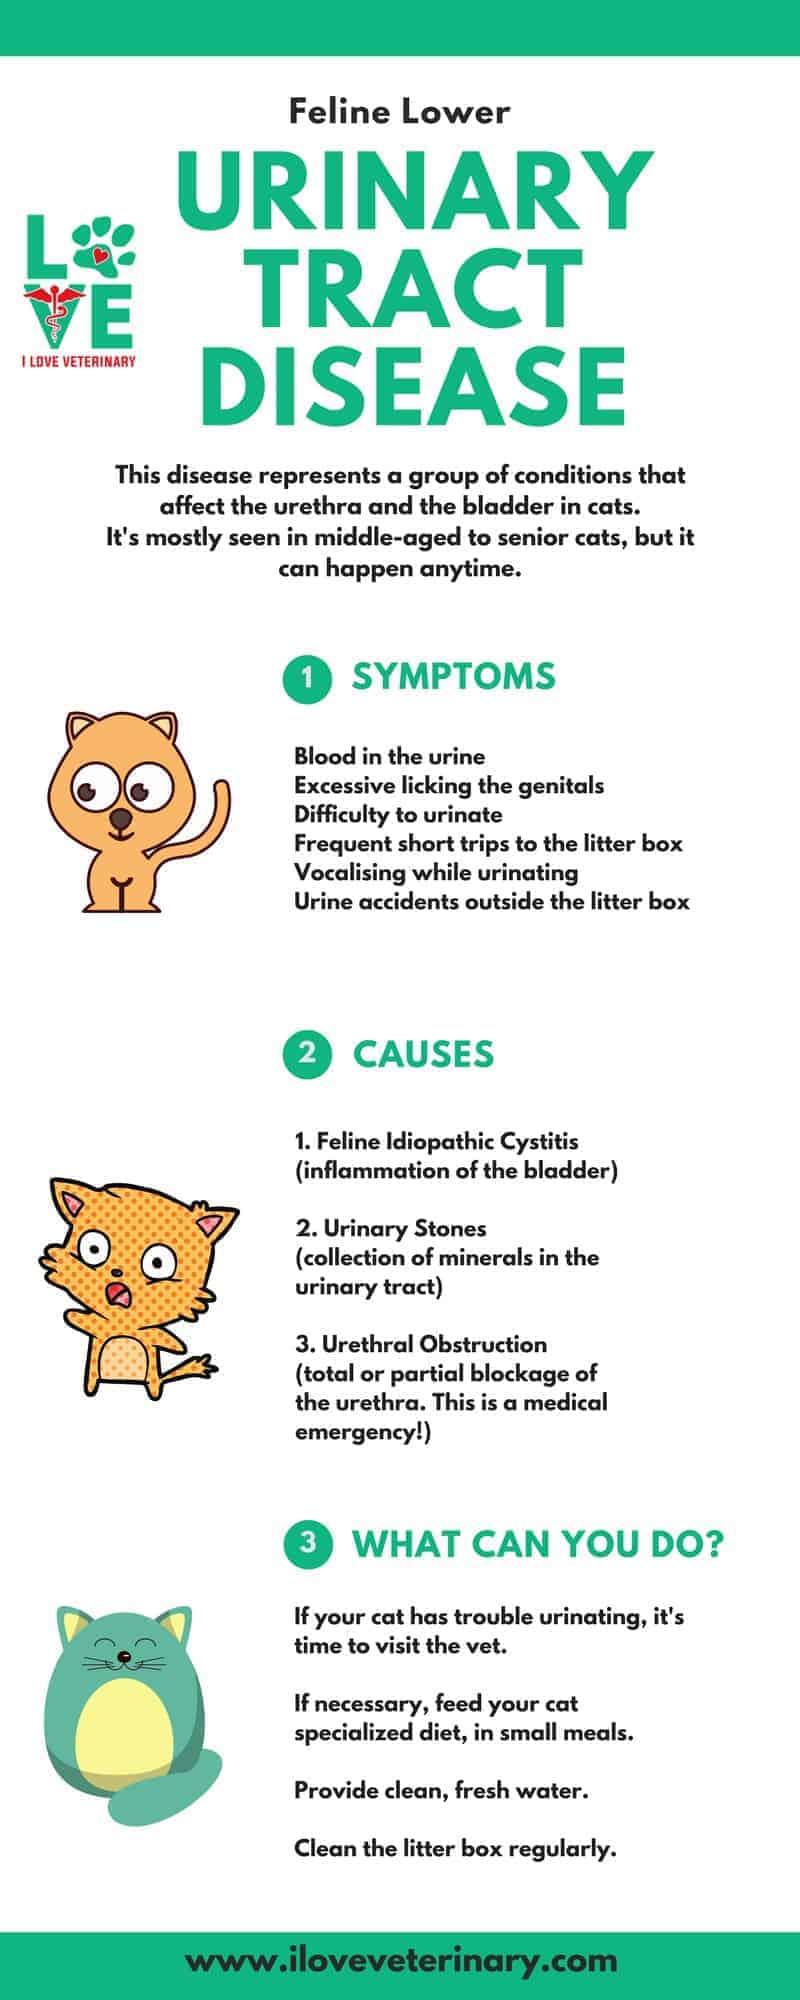 feline lower urinary tract disease infographic